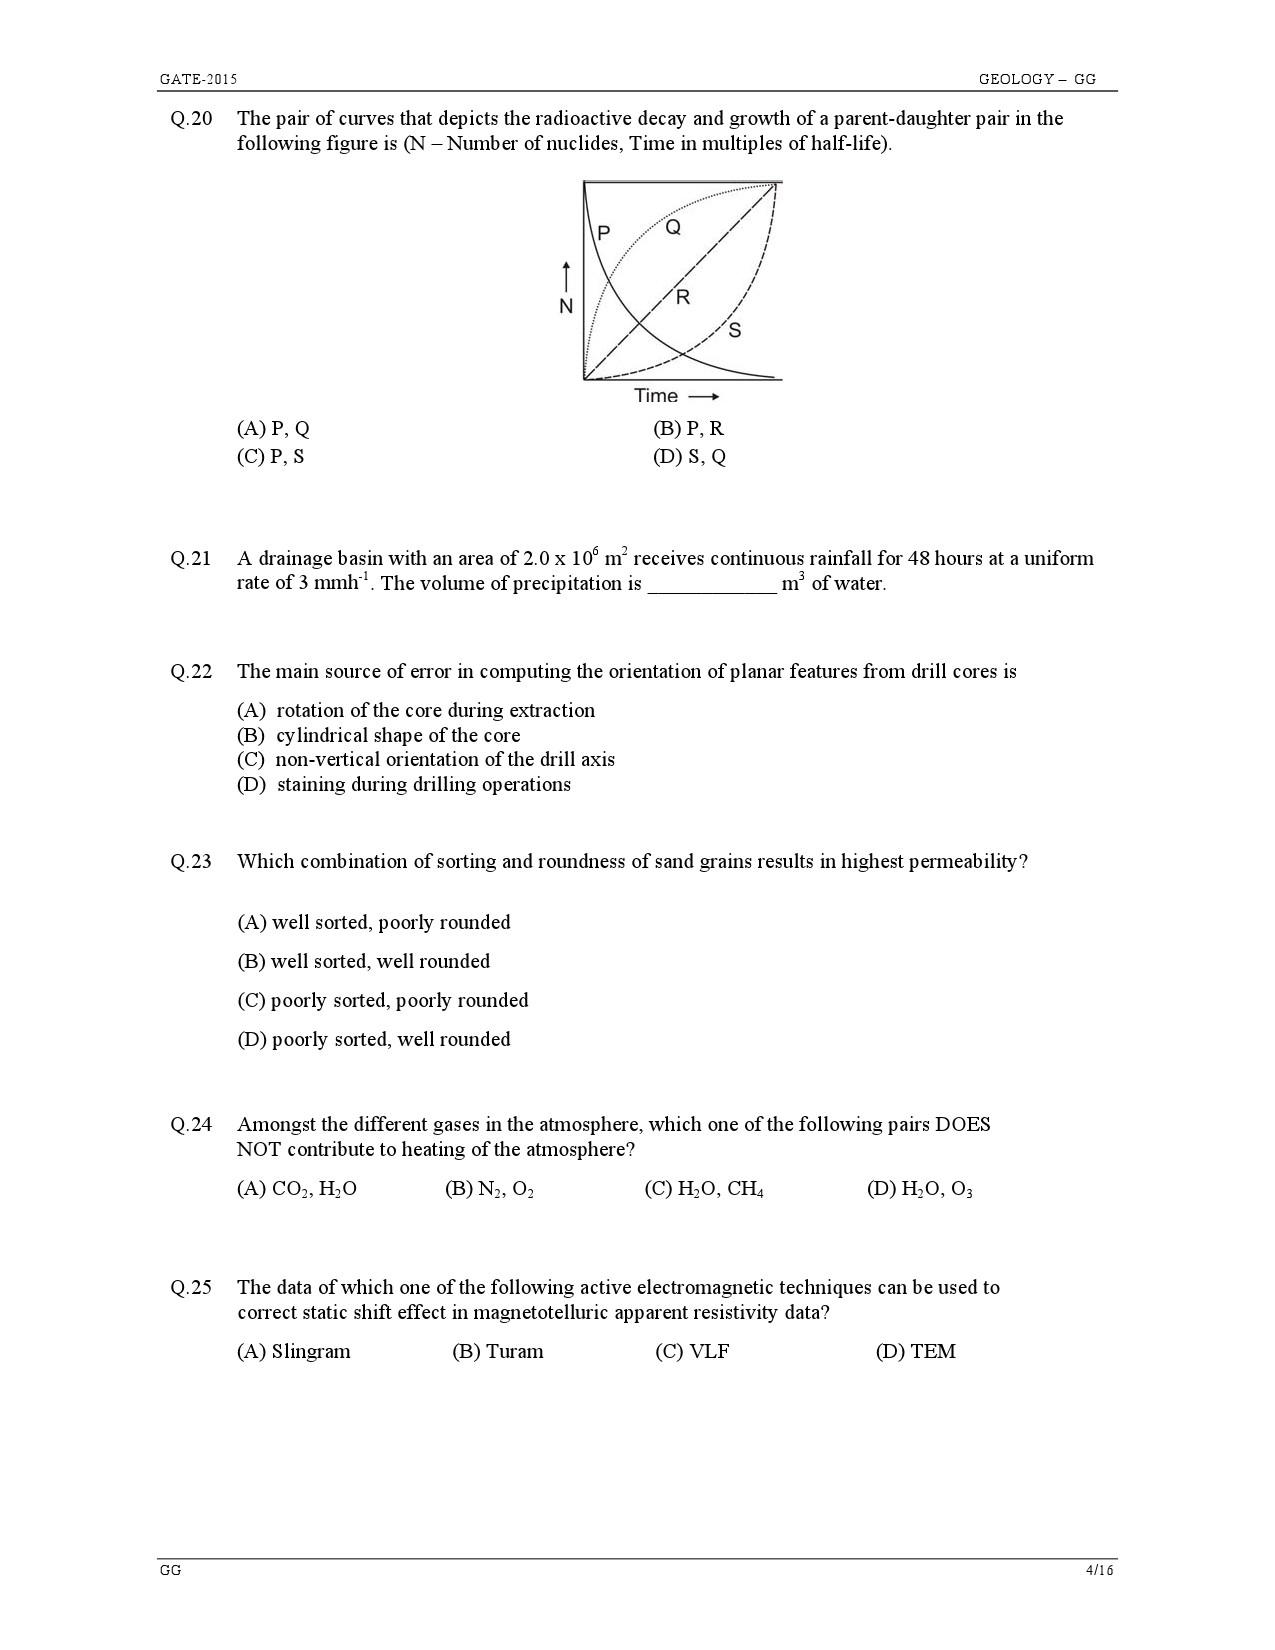 GATE Exam Question Paper 2015 Geology and Geophysics 4